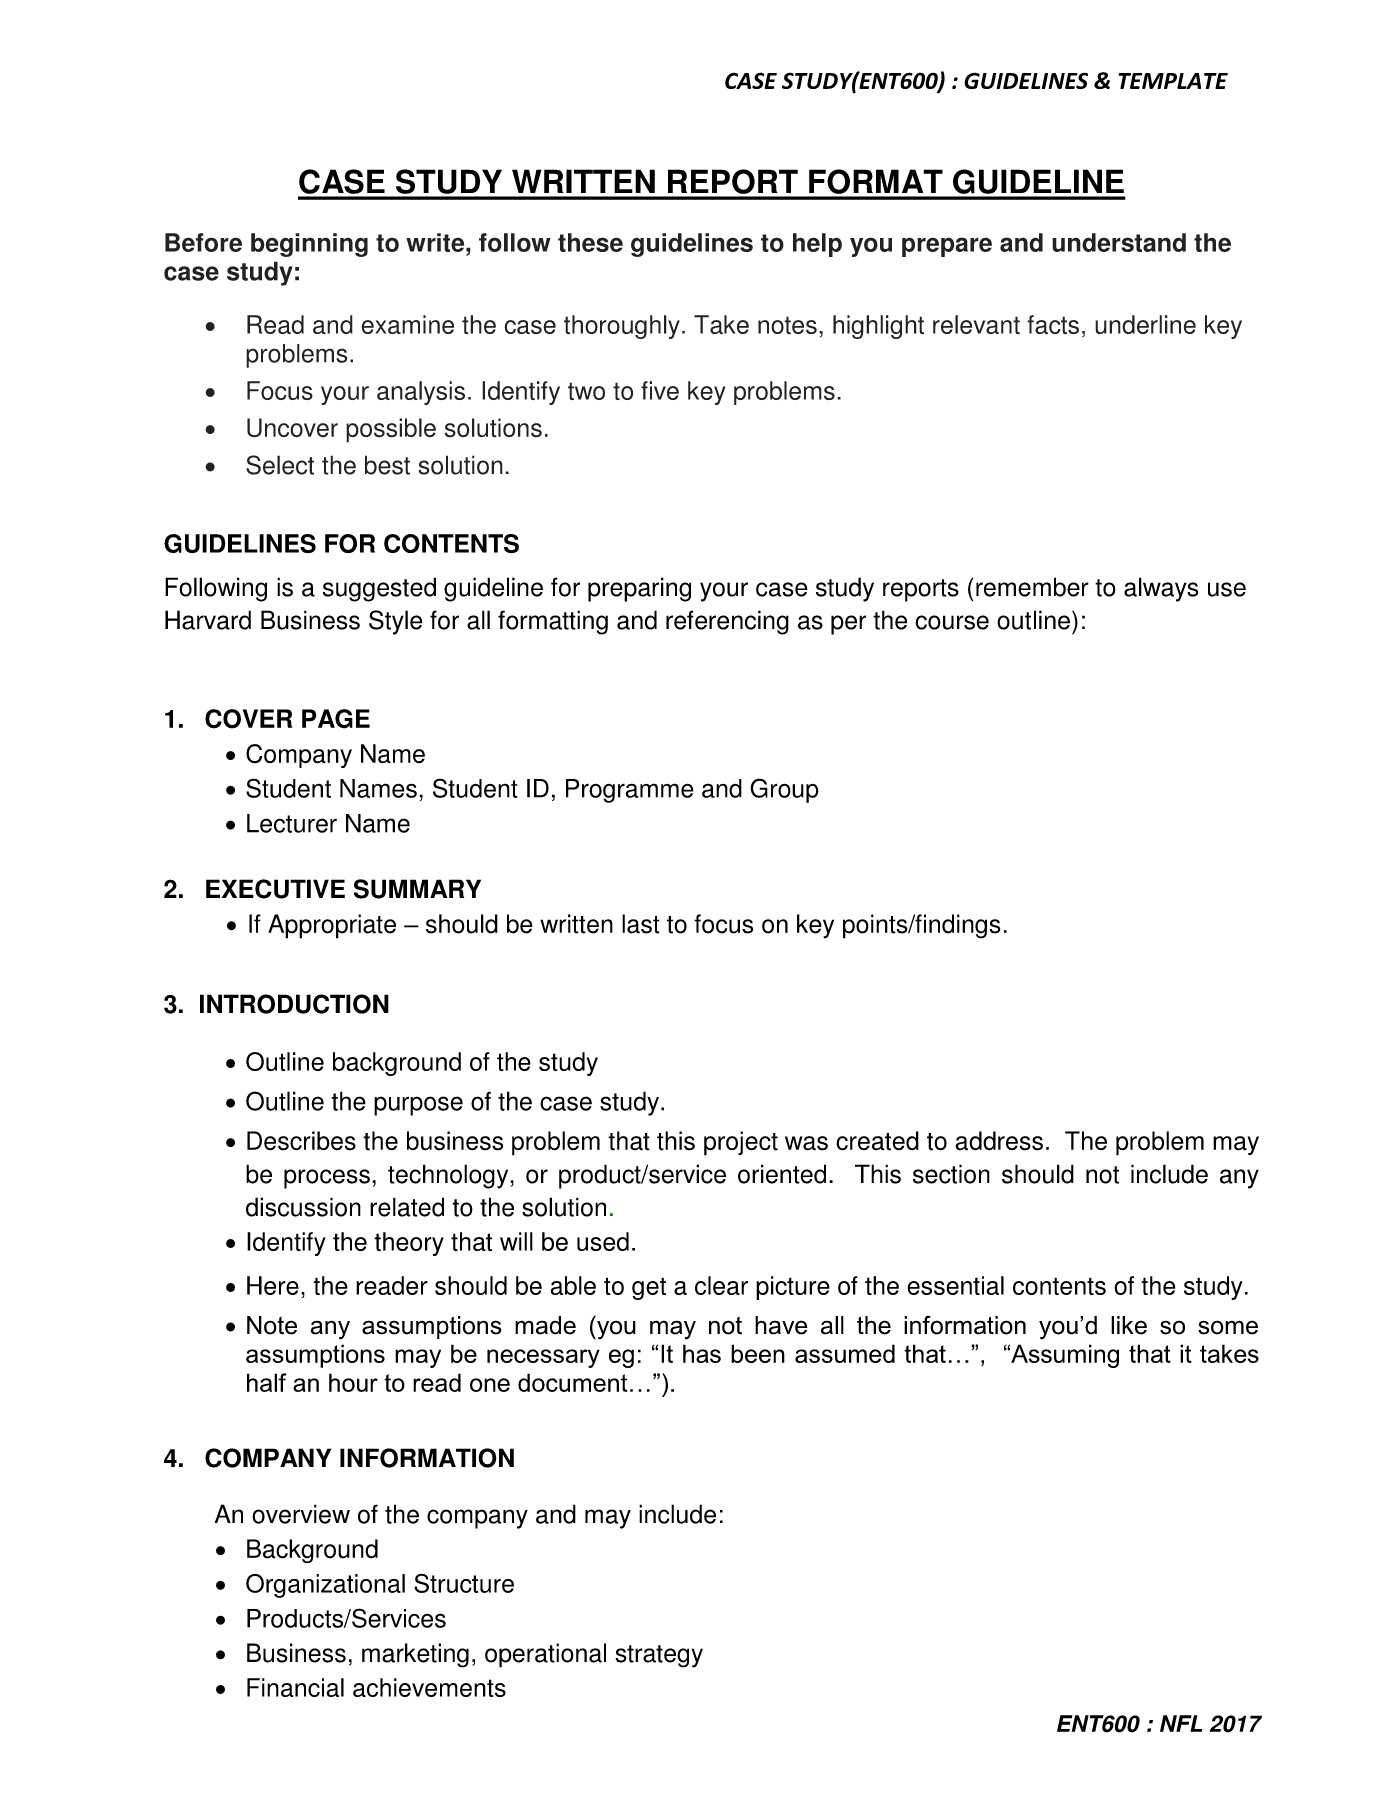 Ent600 Case Study Guidelines & Template Pages 1 – 5 – Text Intended For Report Content Page Template